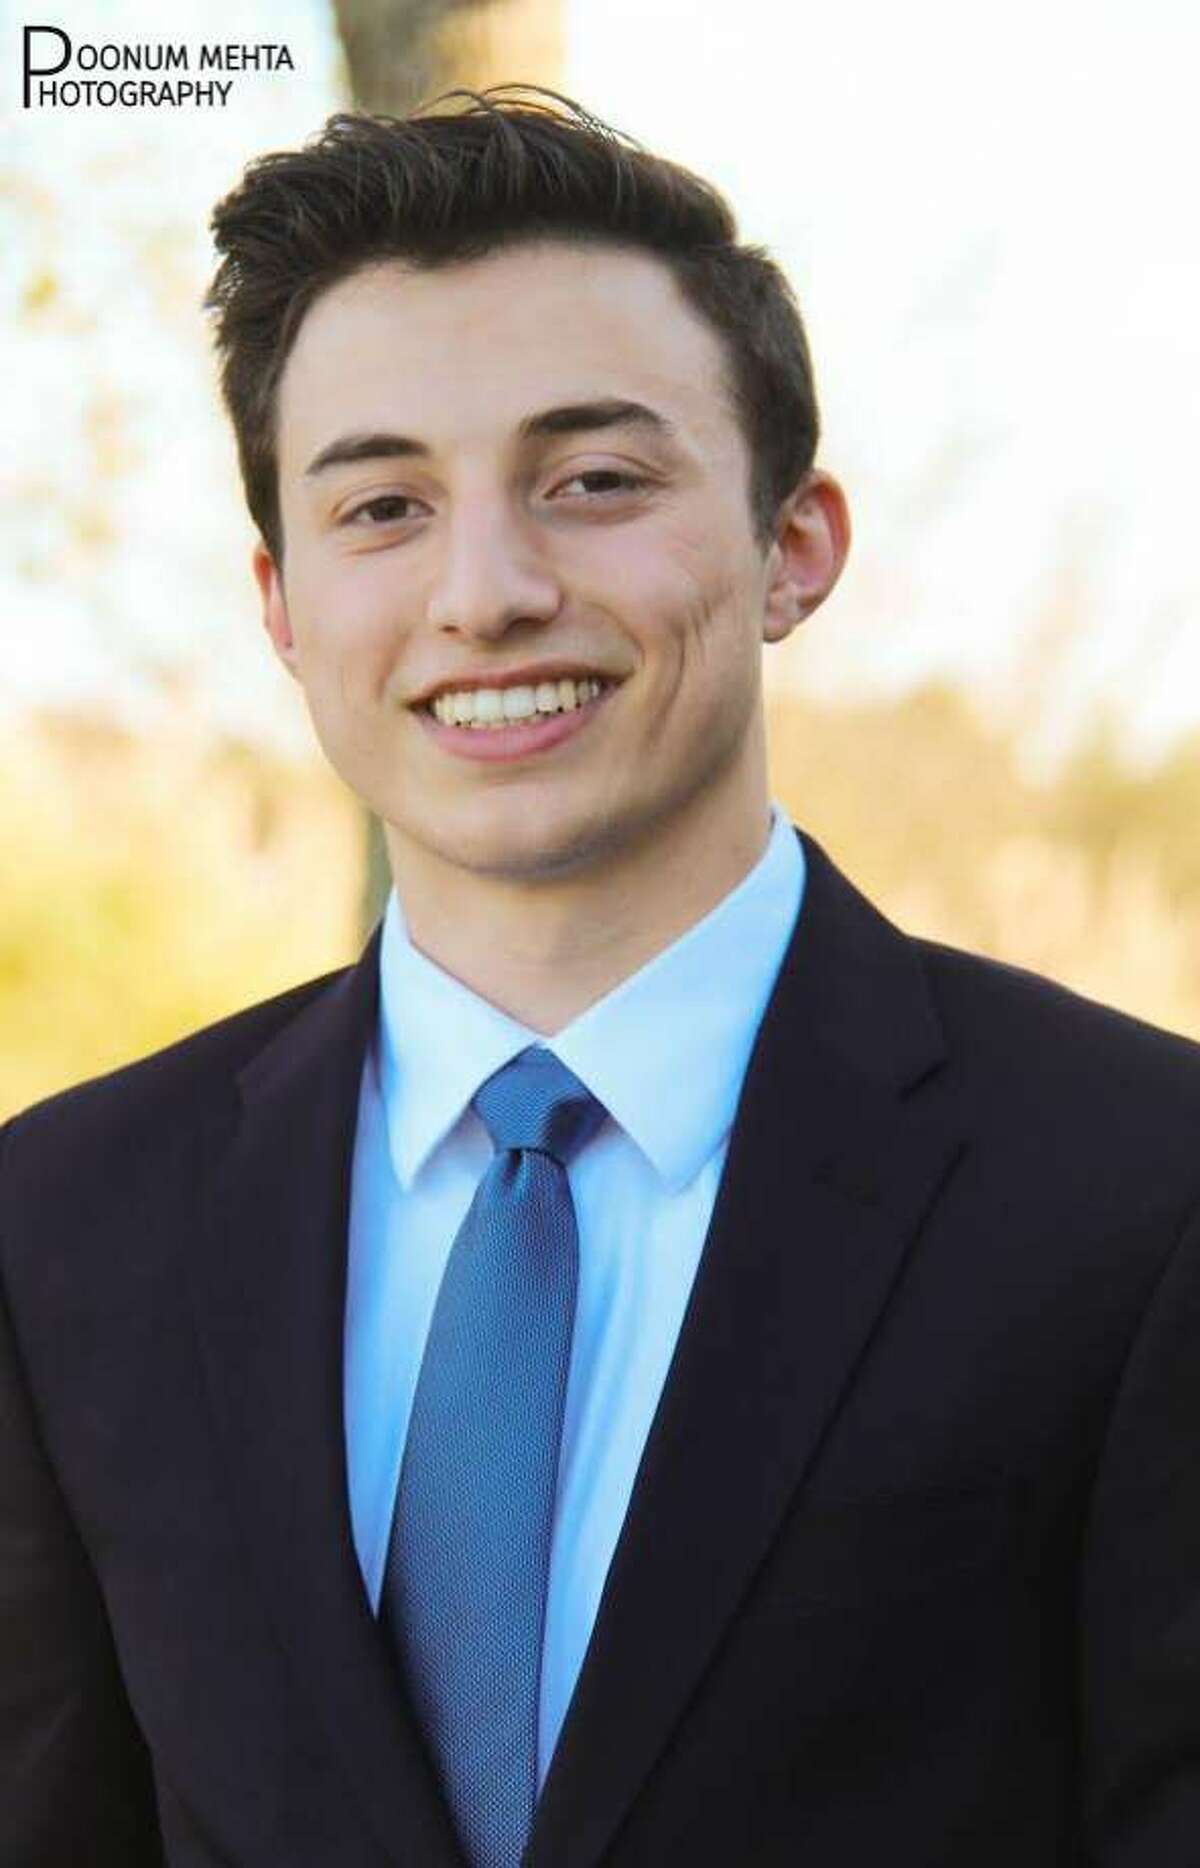 Dawson High School student Mike Floyd has won the election for Pearland ISD School Board Pos. 2, beating incumbent Trustee Rusty DeBorde. SLIDESHOW: More election results from Pearland